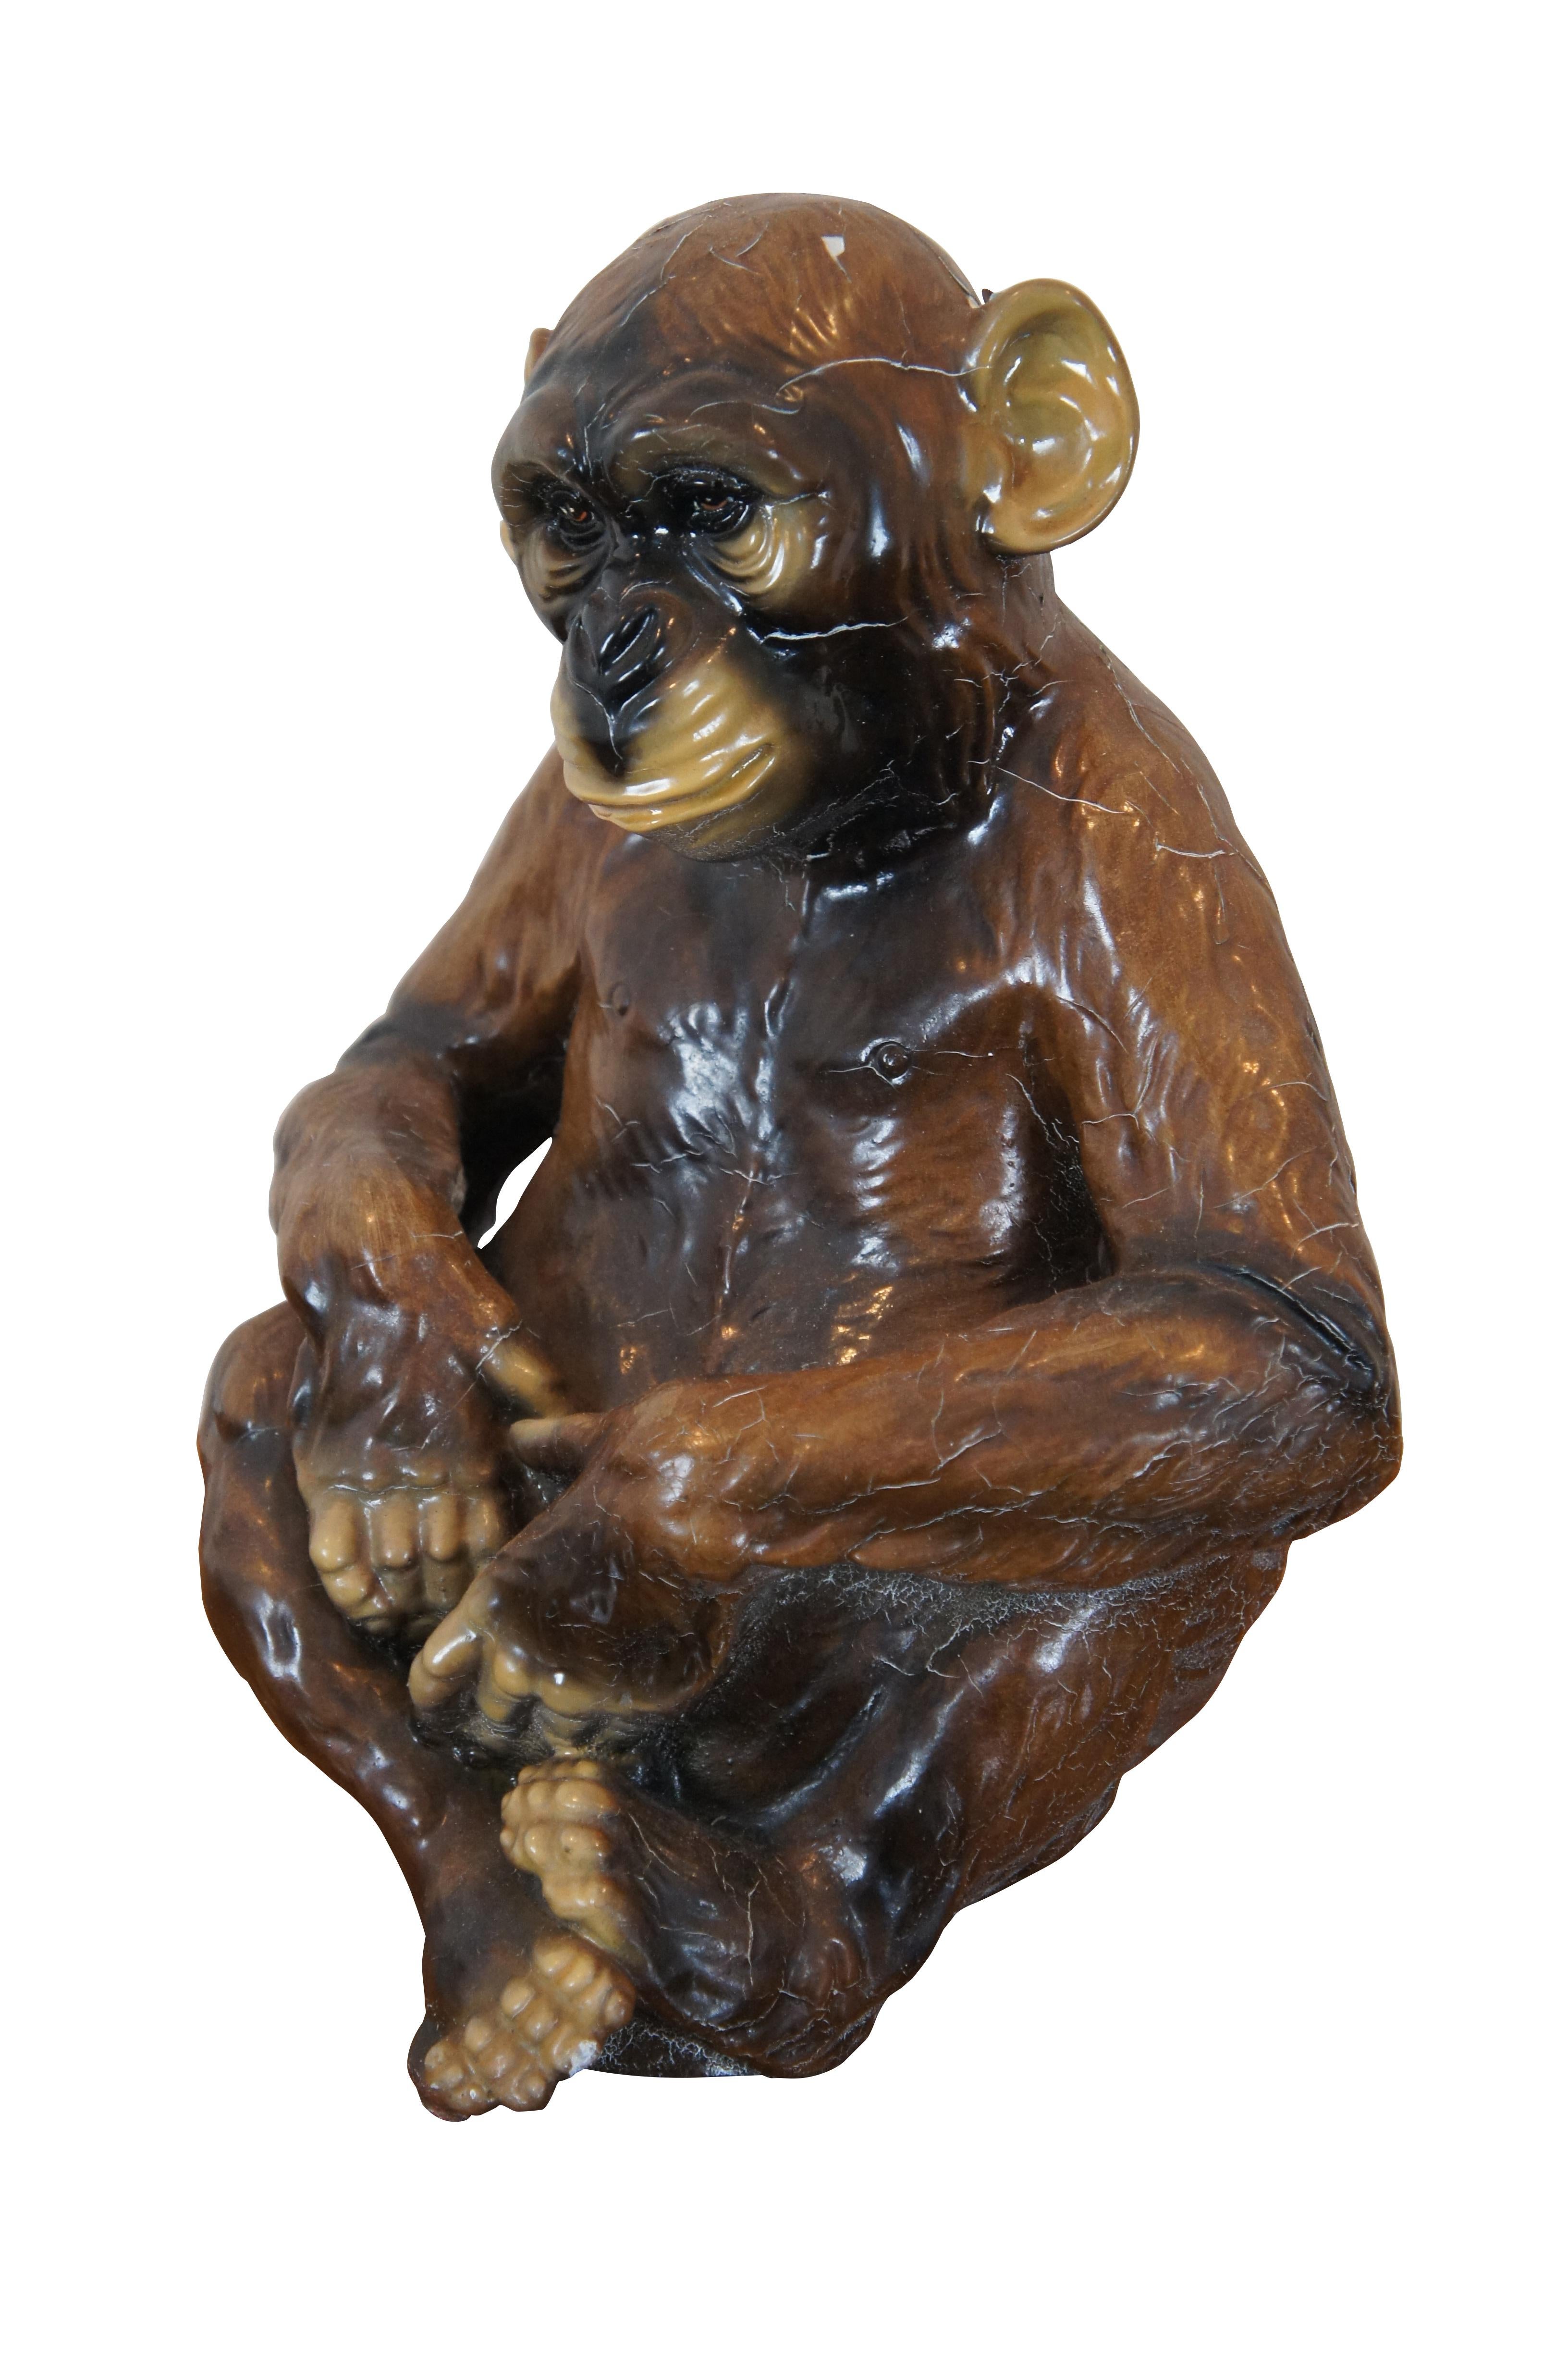 Rare vintage figurine / statue of a seated brown primate / ape / chimpanzee by Marwal Industries Inc, crafted of chalkware with a glossy lacquer finish.

